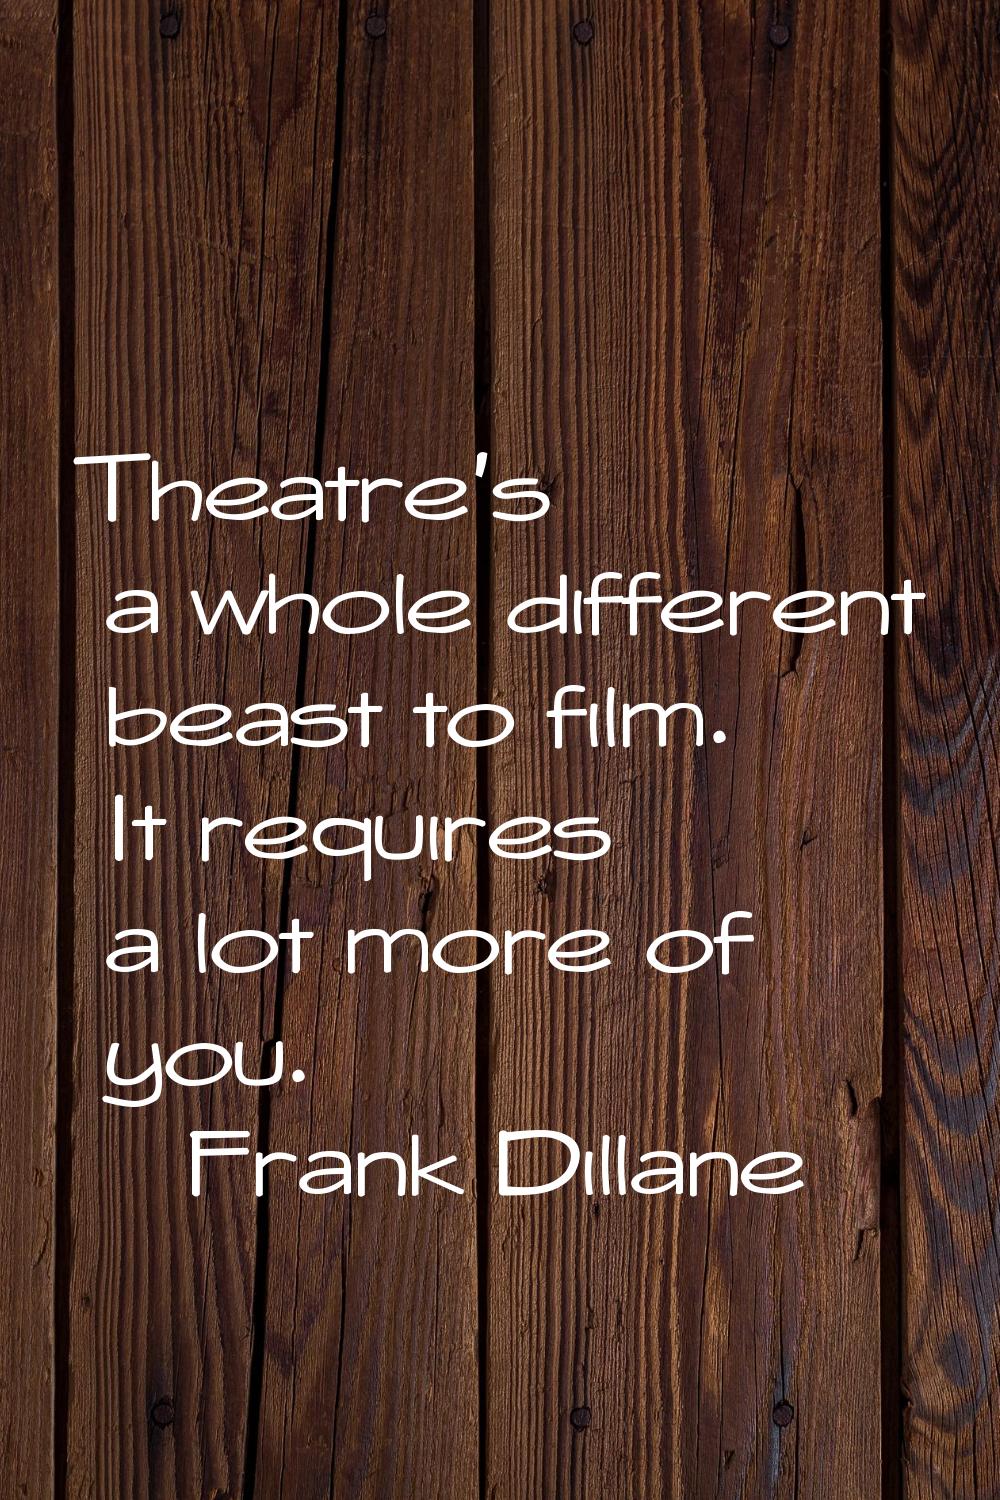 Theatre's a whole different beast to film. It requires a lot more of you.